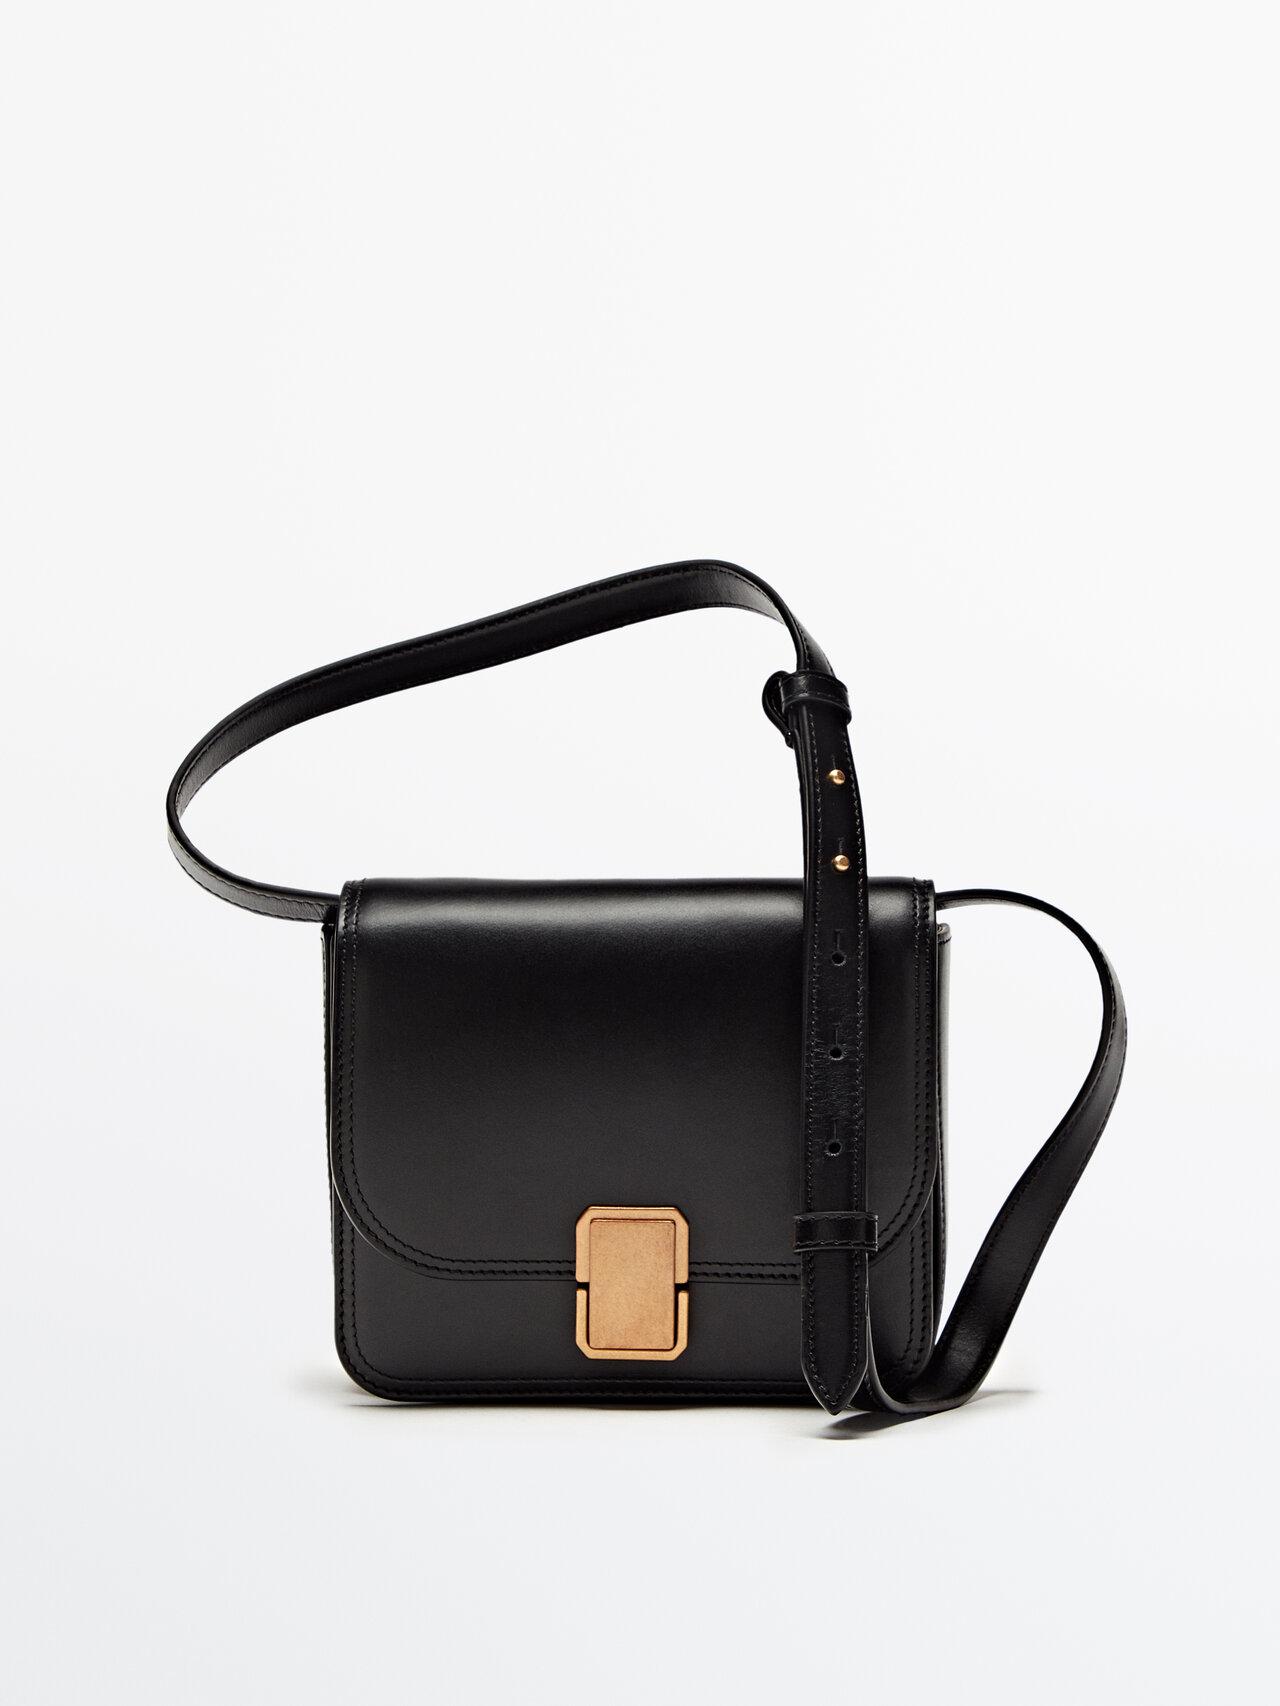 MASSIMO DUTTI Leather Crossbody Bag With Multi-way Strap in Black | Lyst